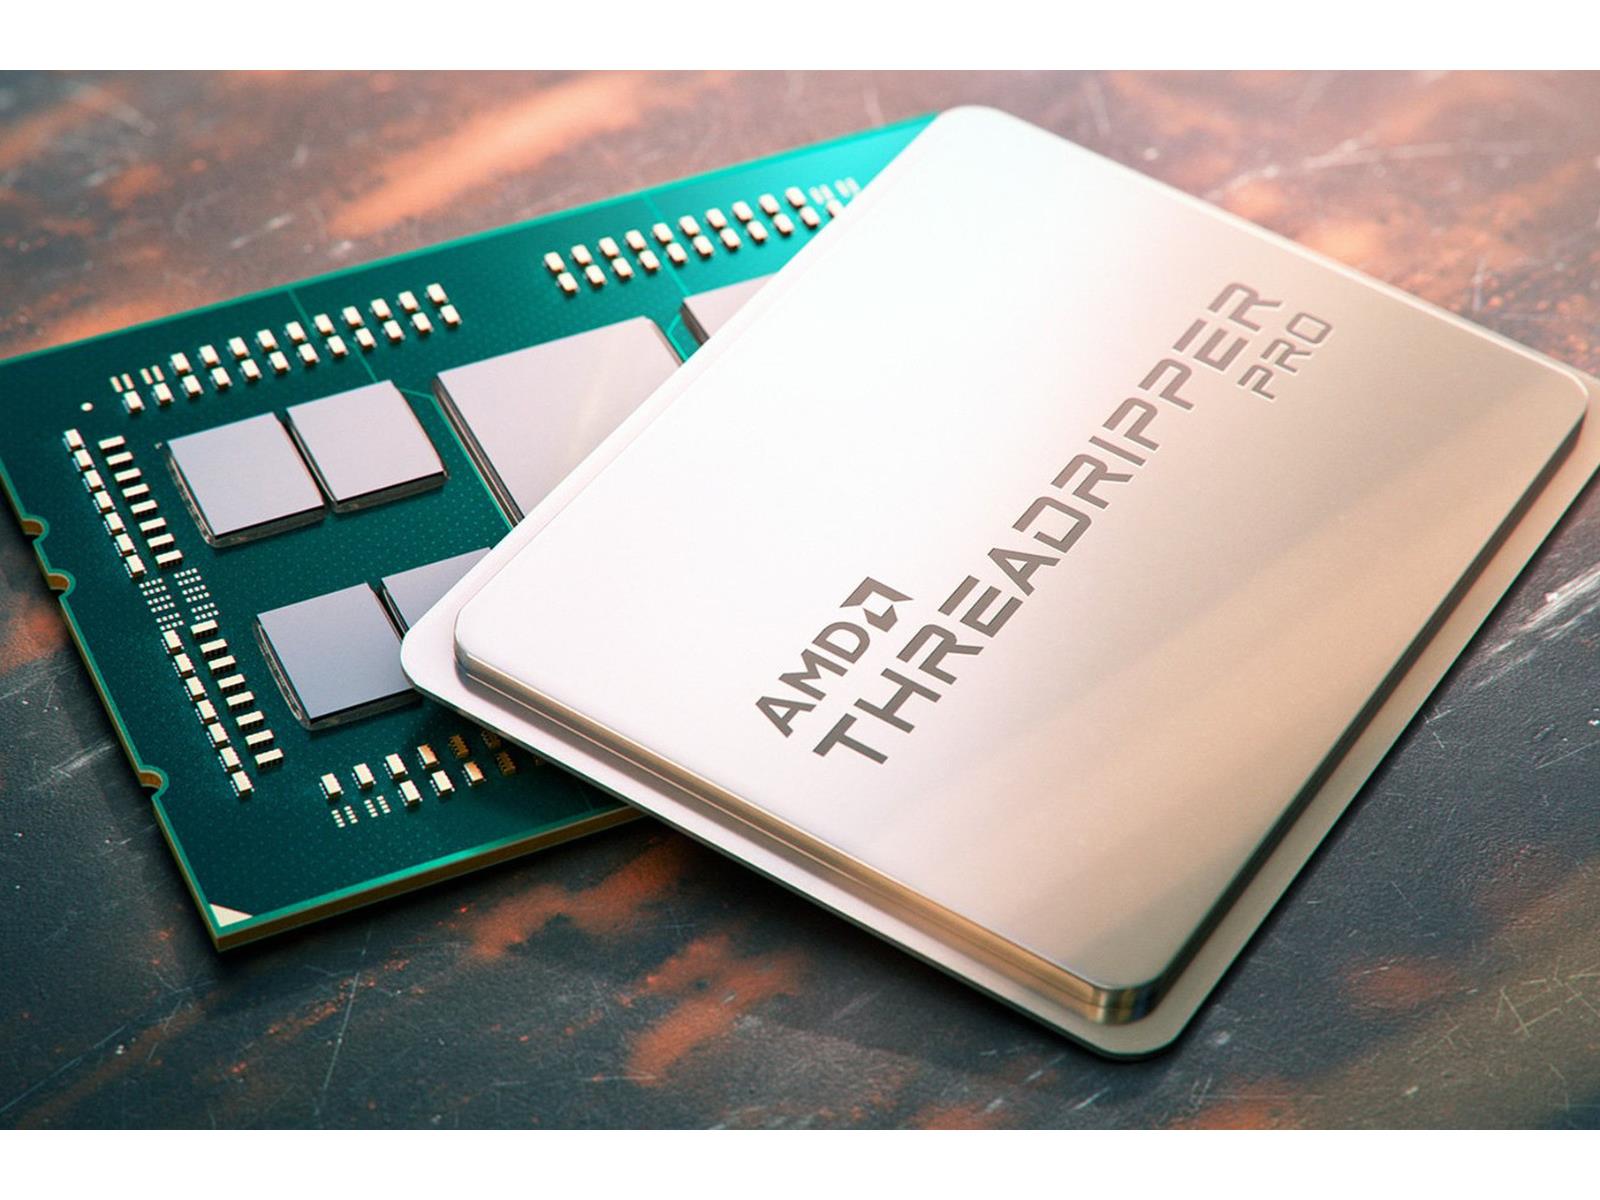 Discover the new Threadripper™ PRO 7000 Series Processors 